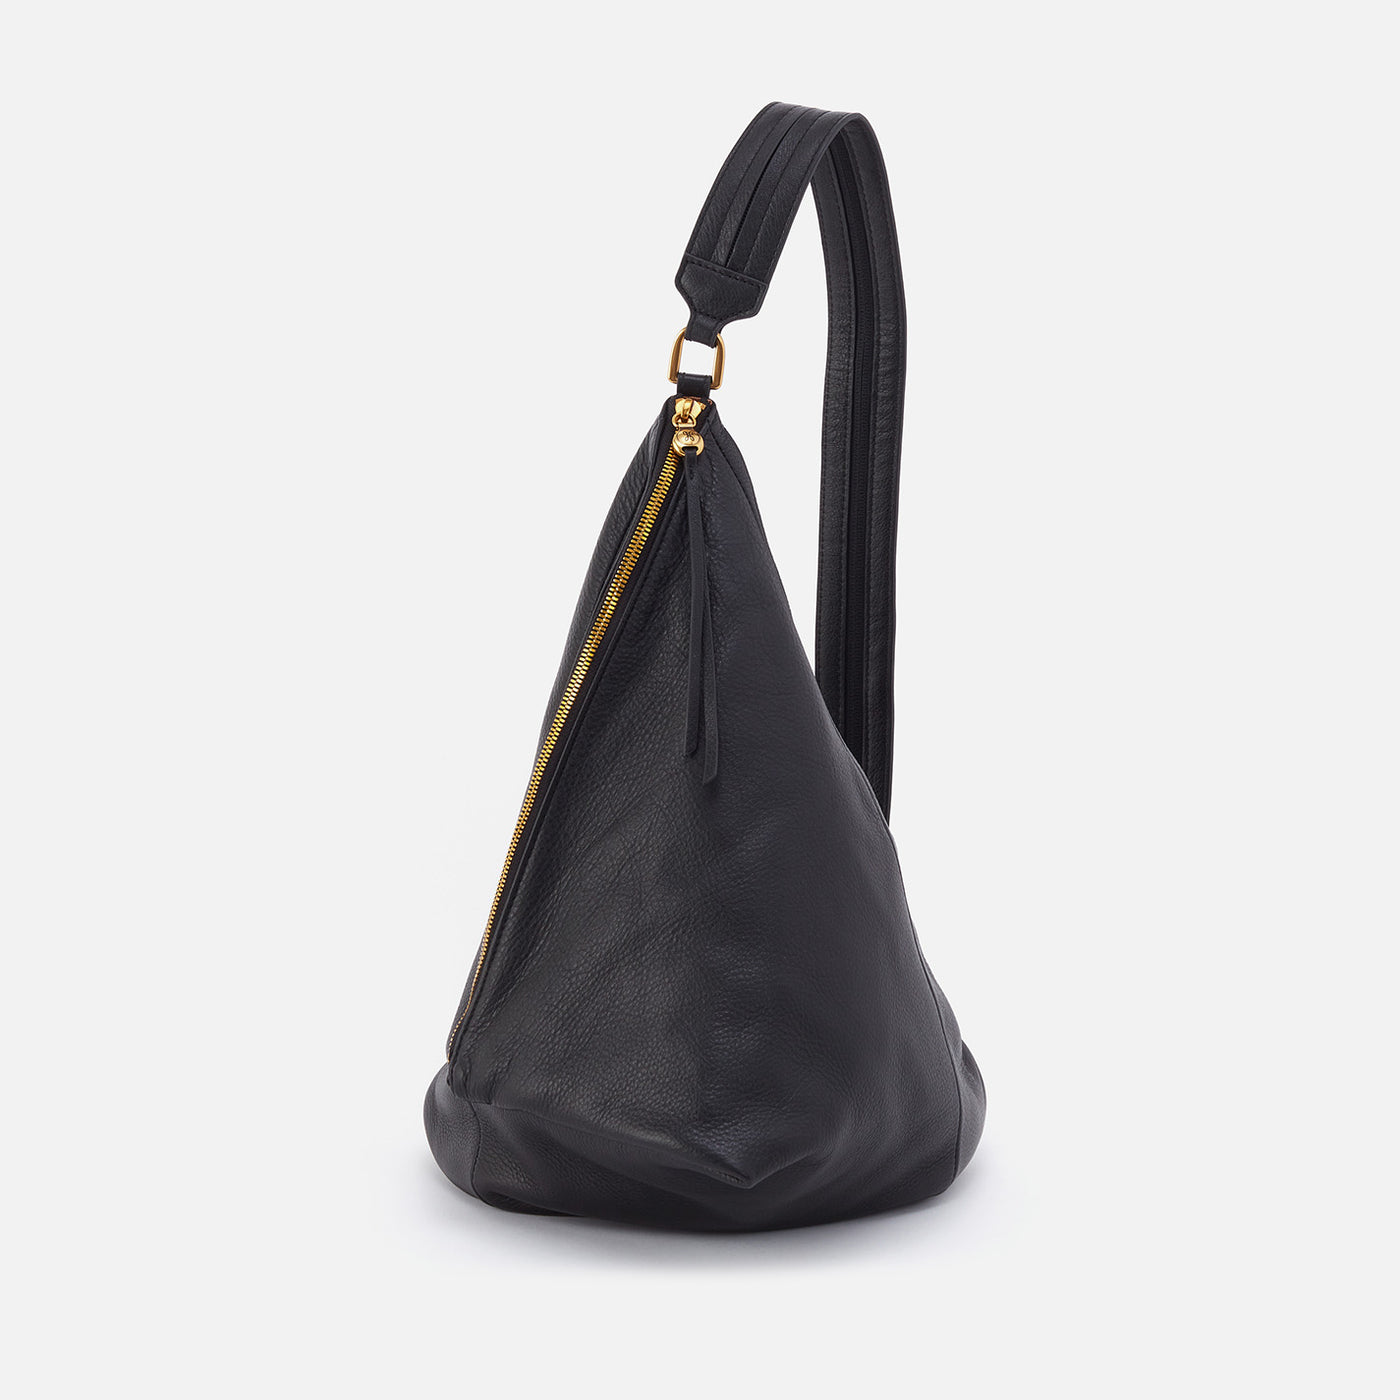 Sway Convertible Sling in Pebbled Leather - Black